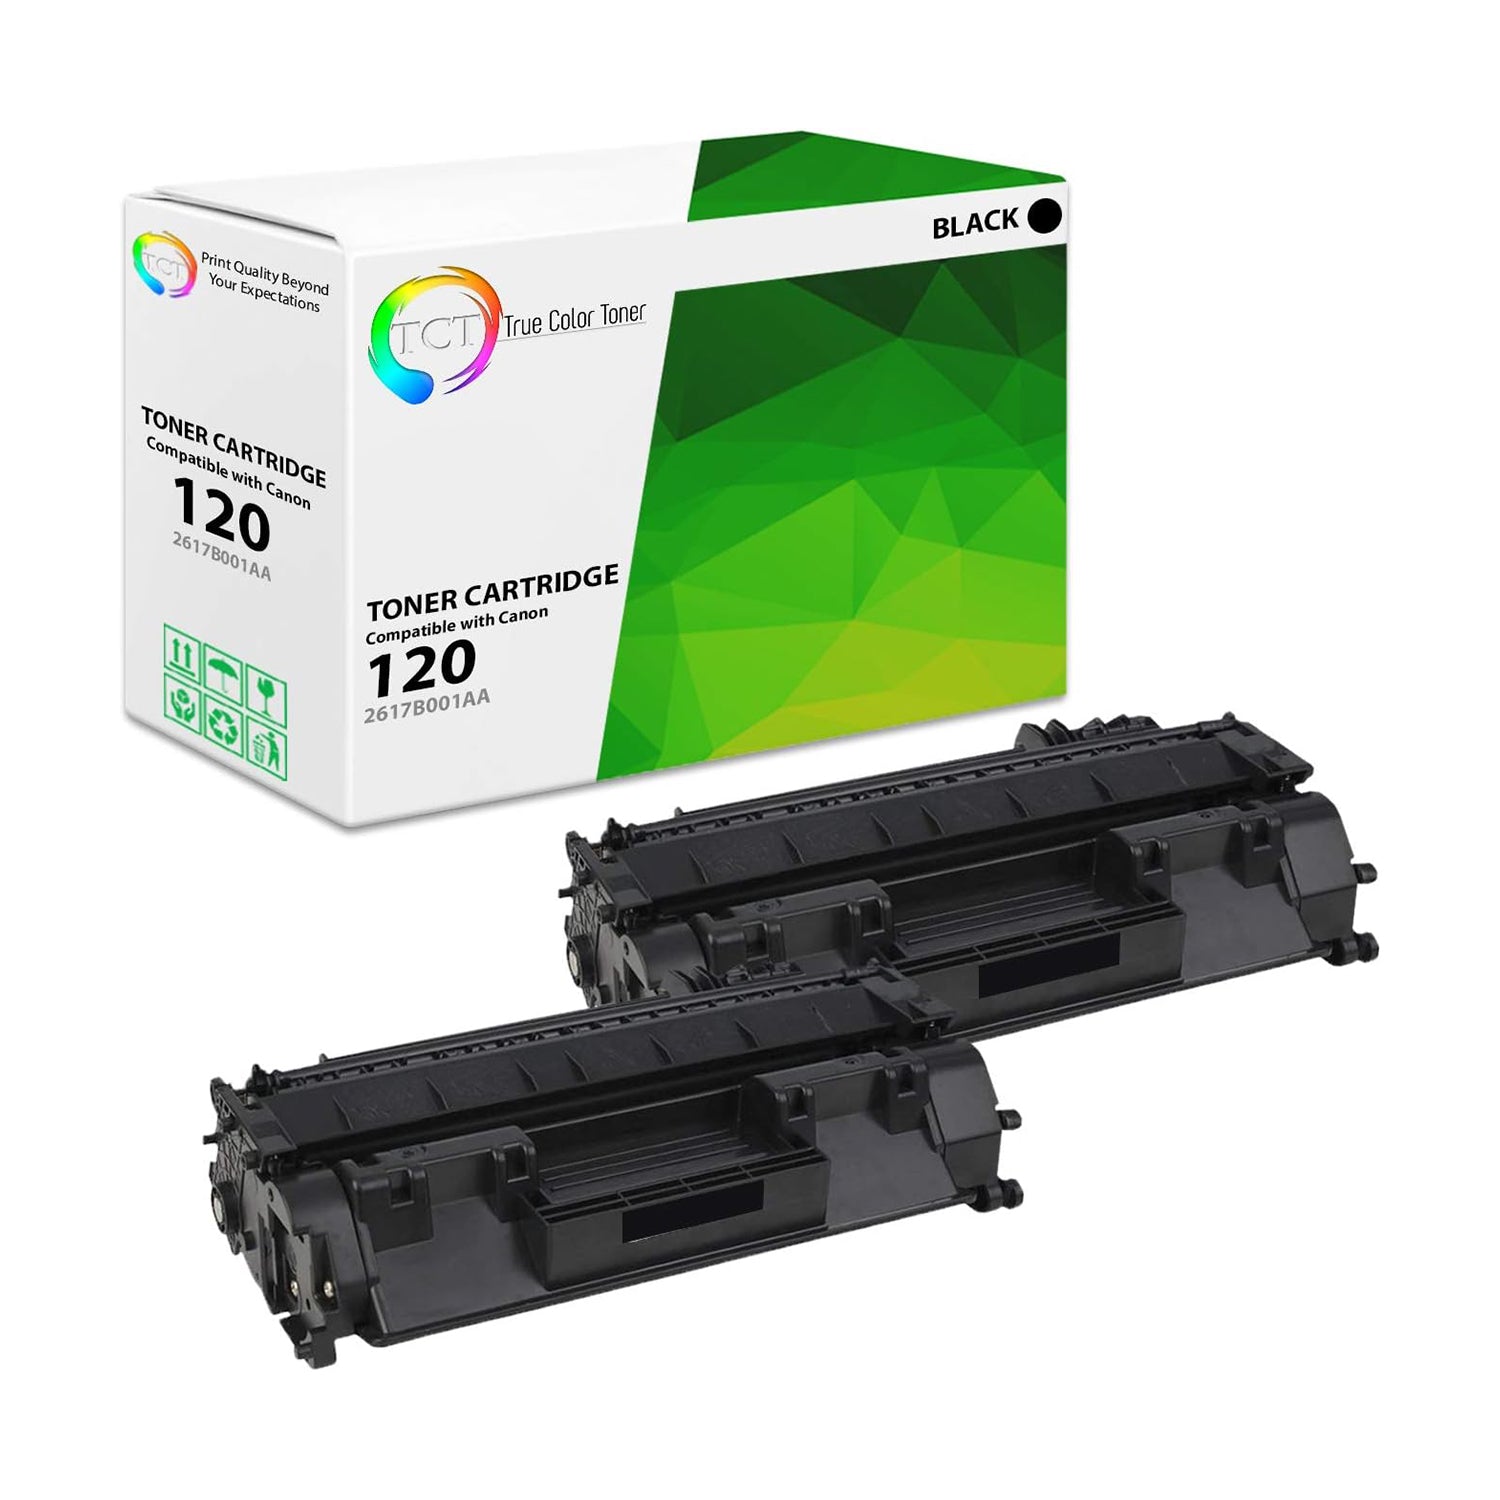 TCT Compatible Toner Cartridge Replacement for the Canon 120 Series - 2 Pack Black